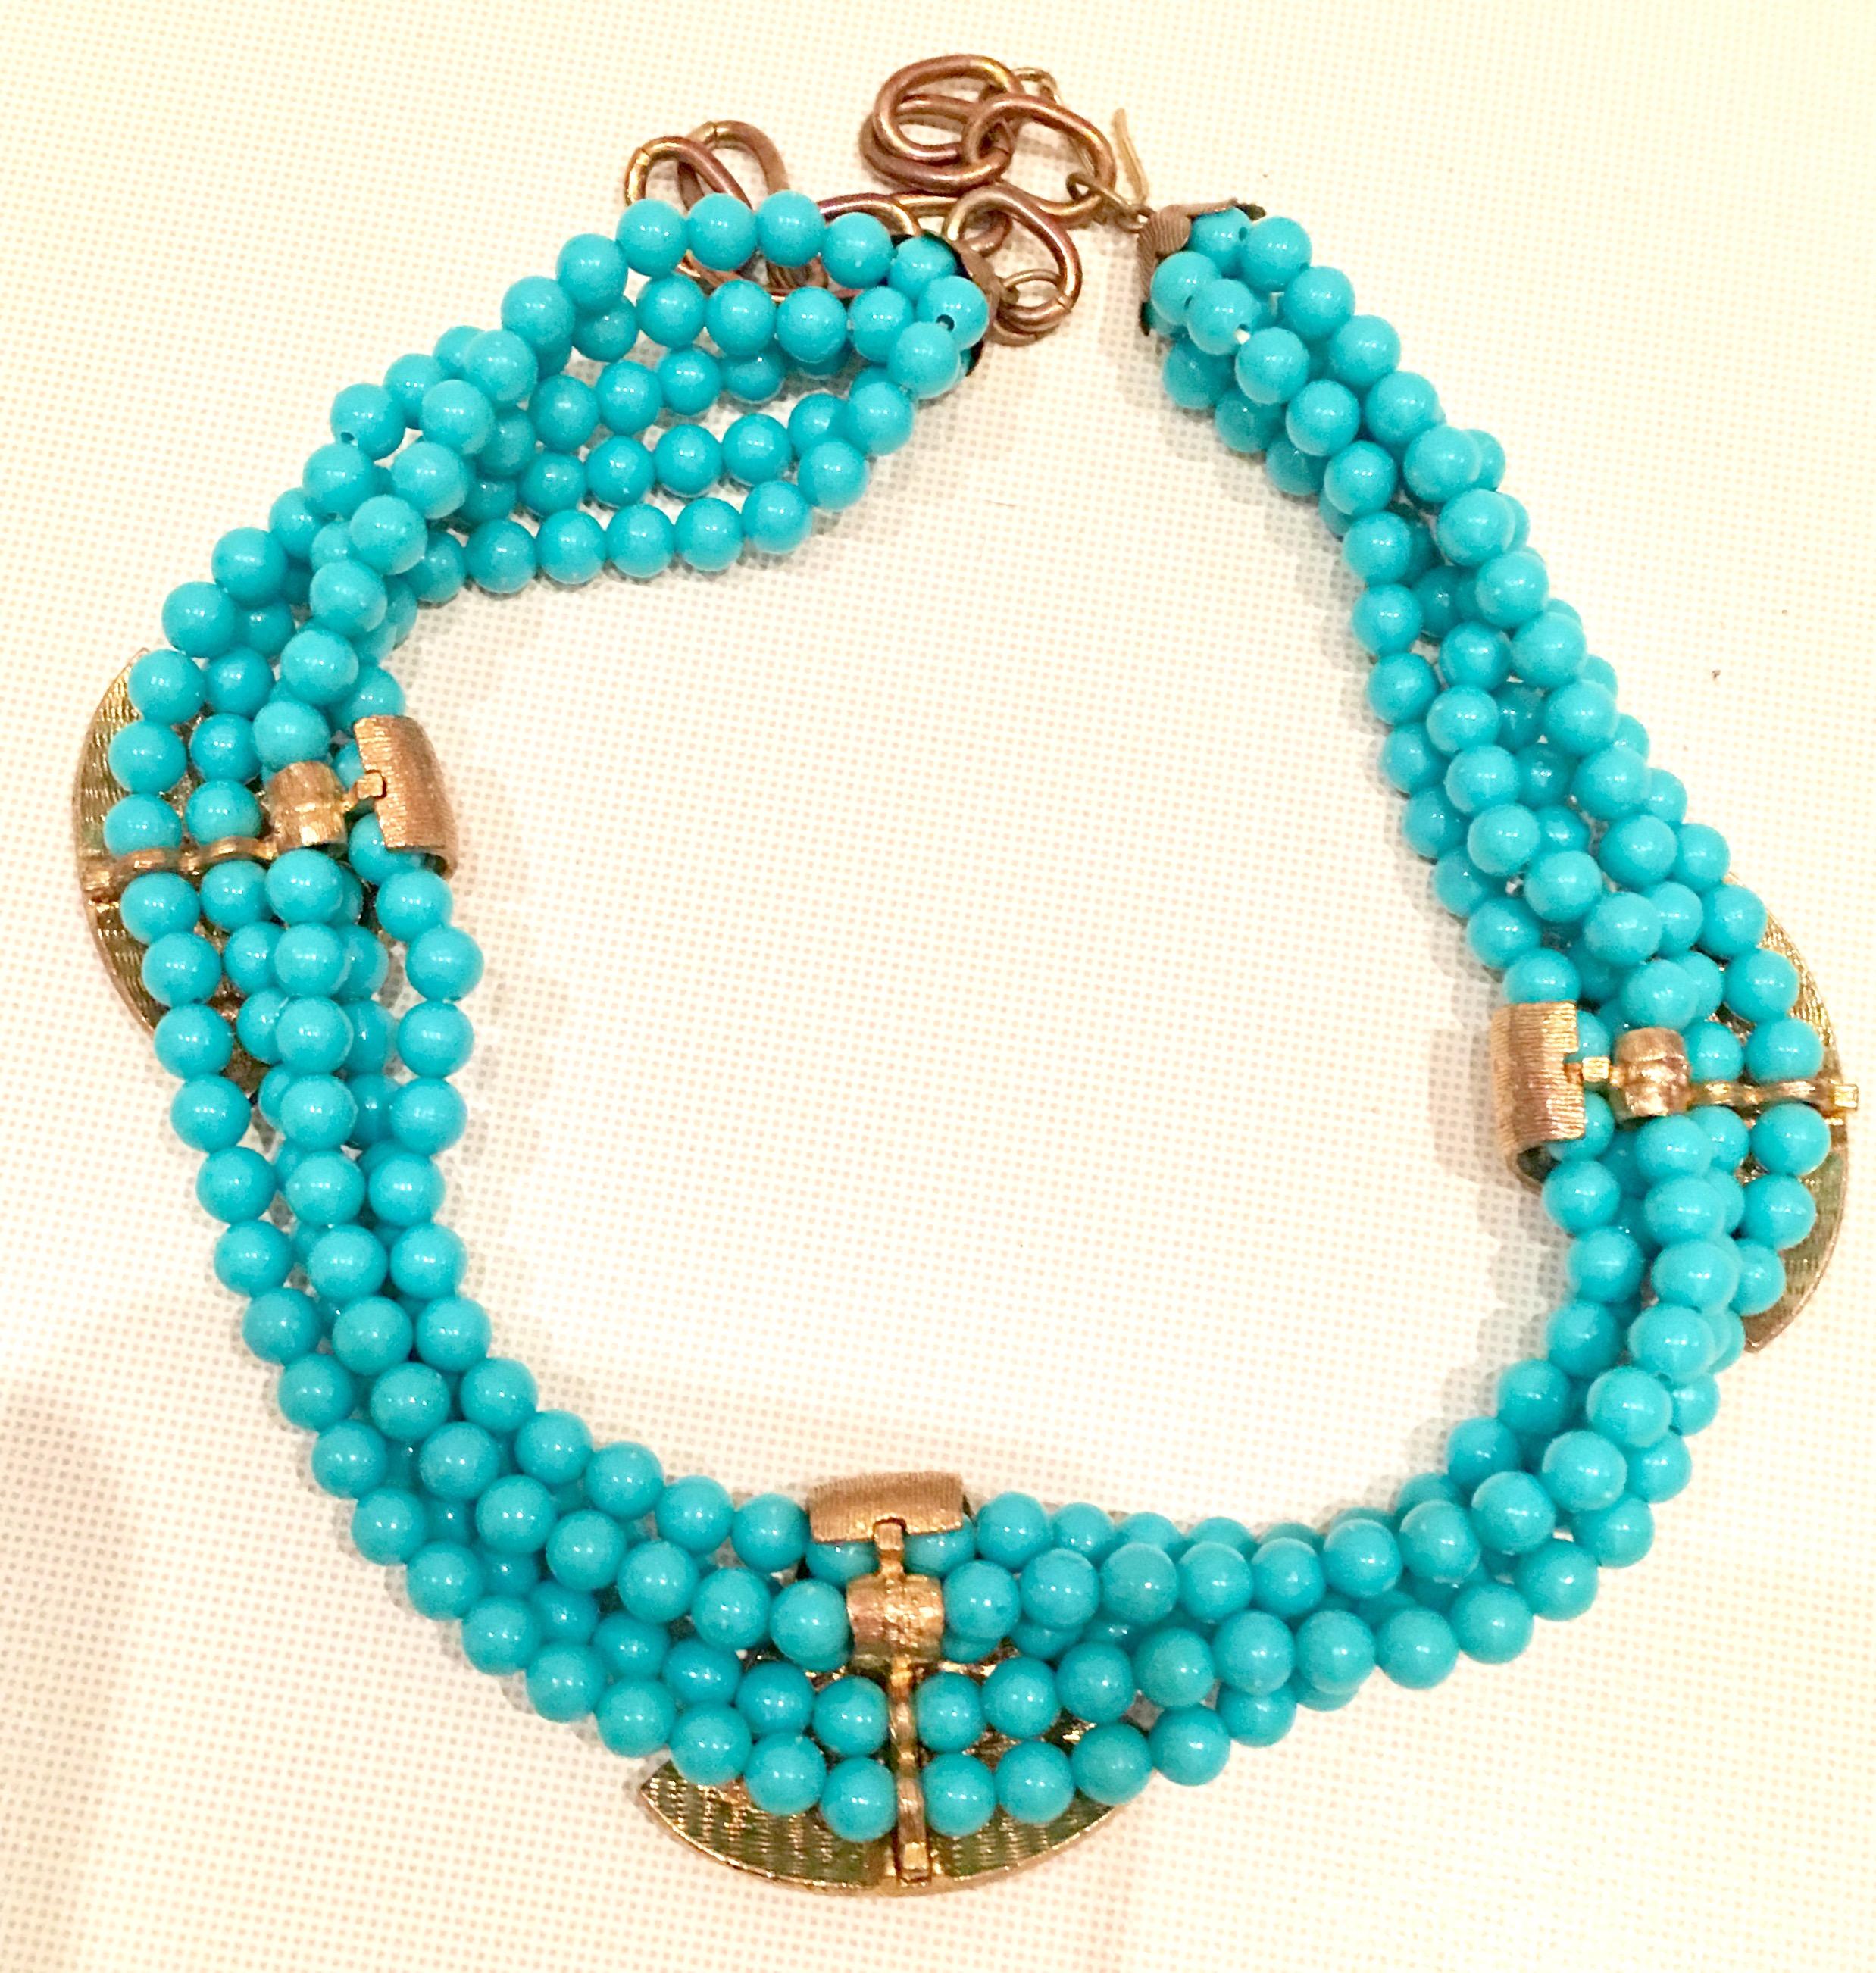 60'S Haskell Style Turquoise Bead & Swarovski Crystal Necklace & Earrings S/3 6